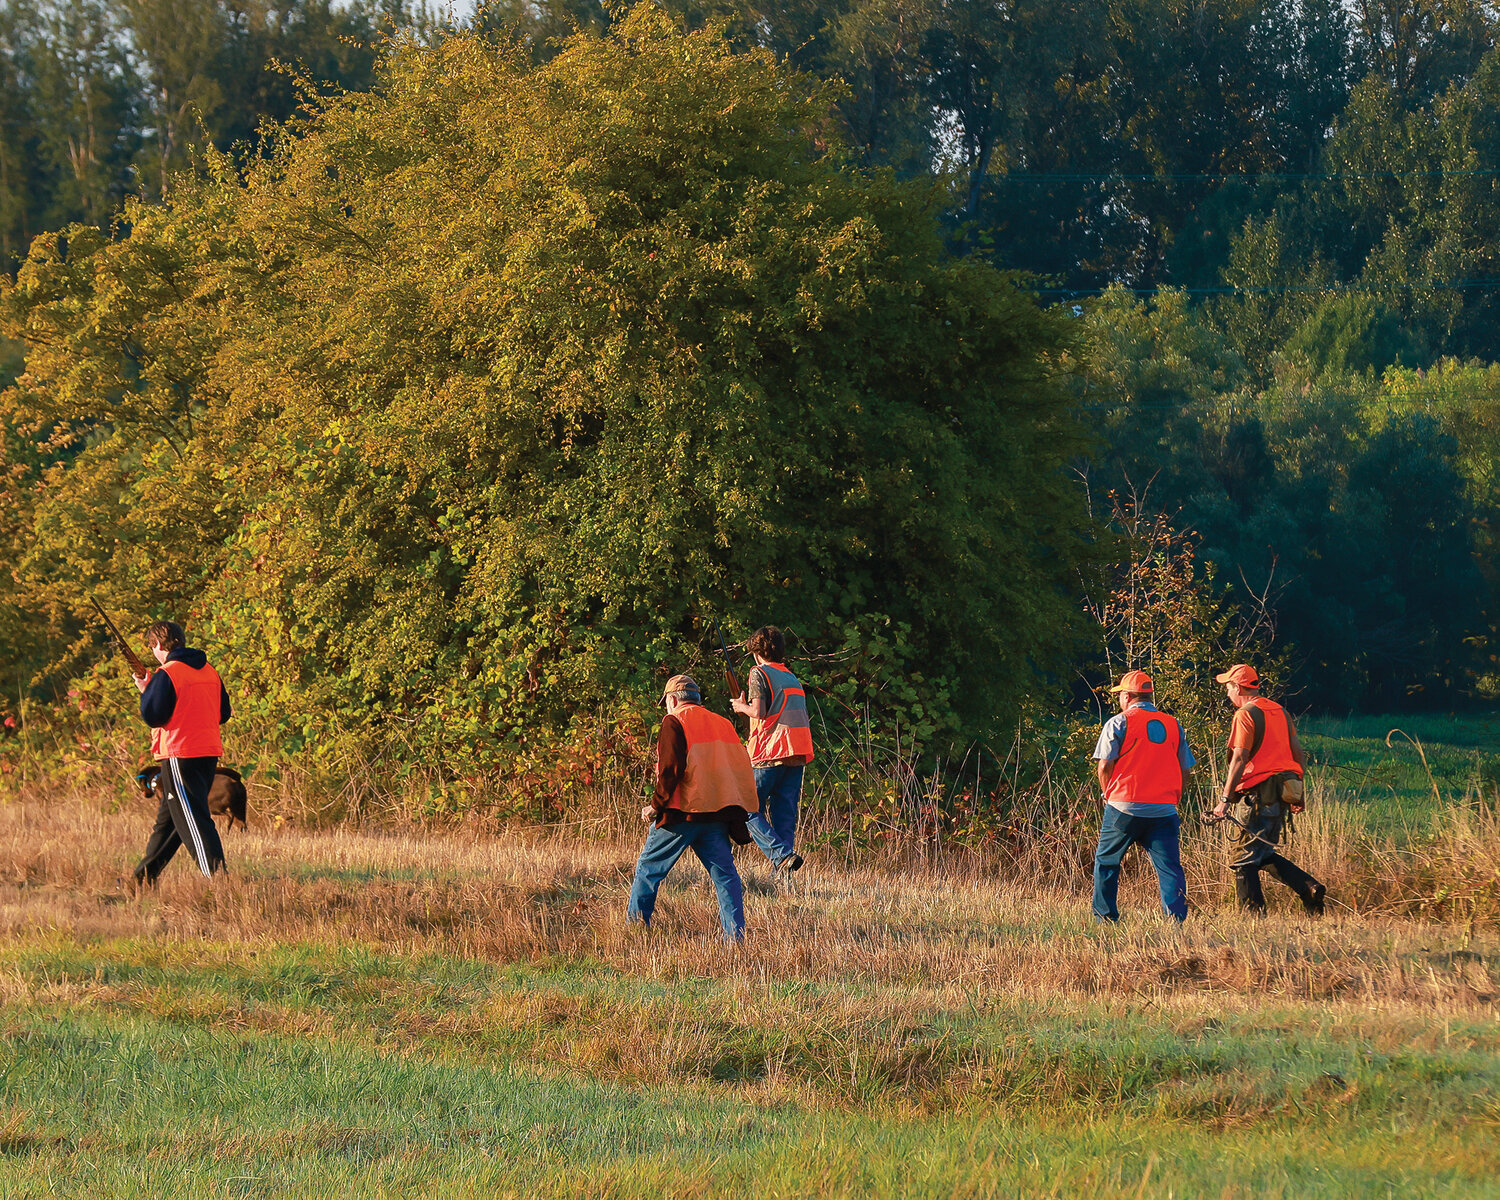 Hunters take to the field on Saturday, Sept. 16 in hopes of shooting the limit of two pheasants during the youth pheasant hunt at the Shillapoo Wildlife Area near Vancouver Lake.